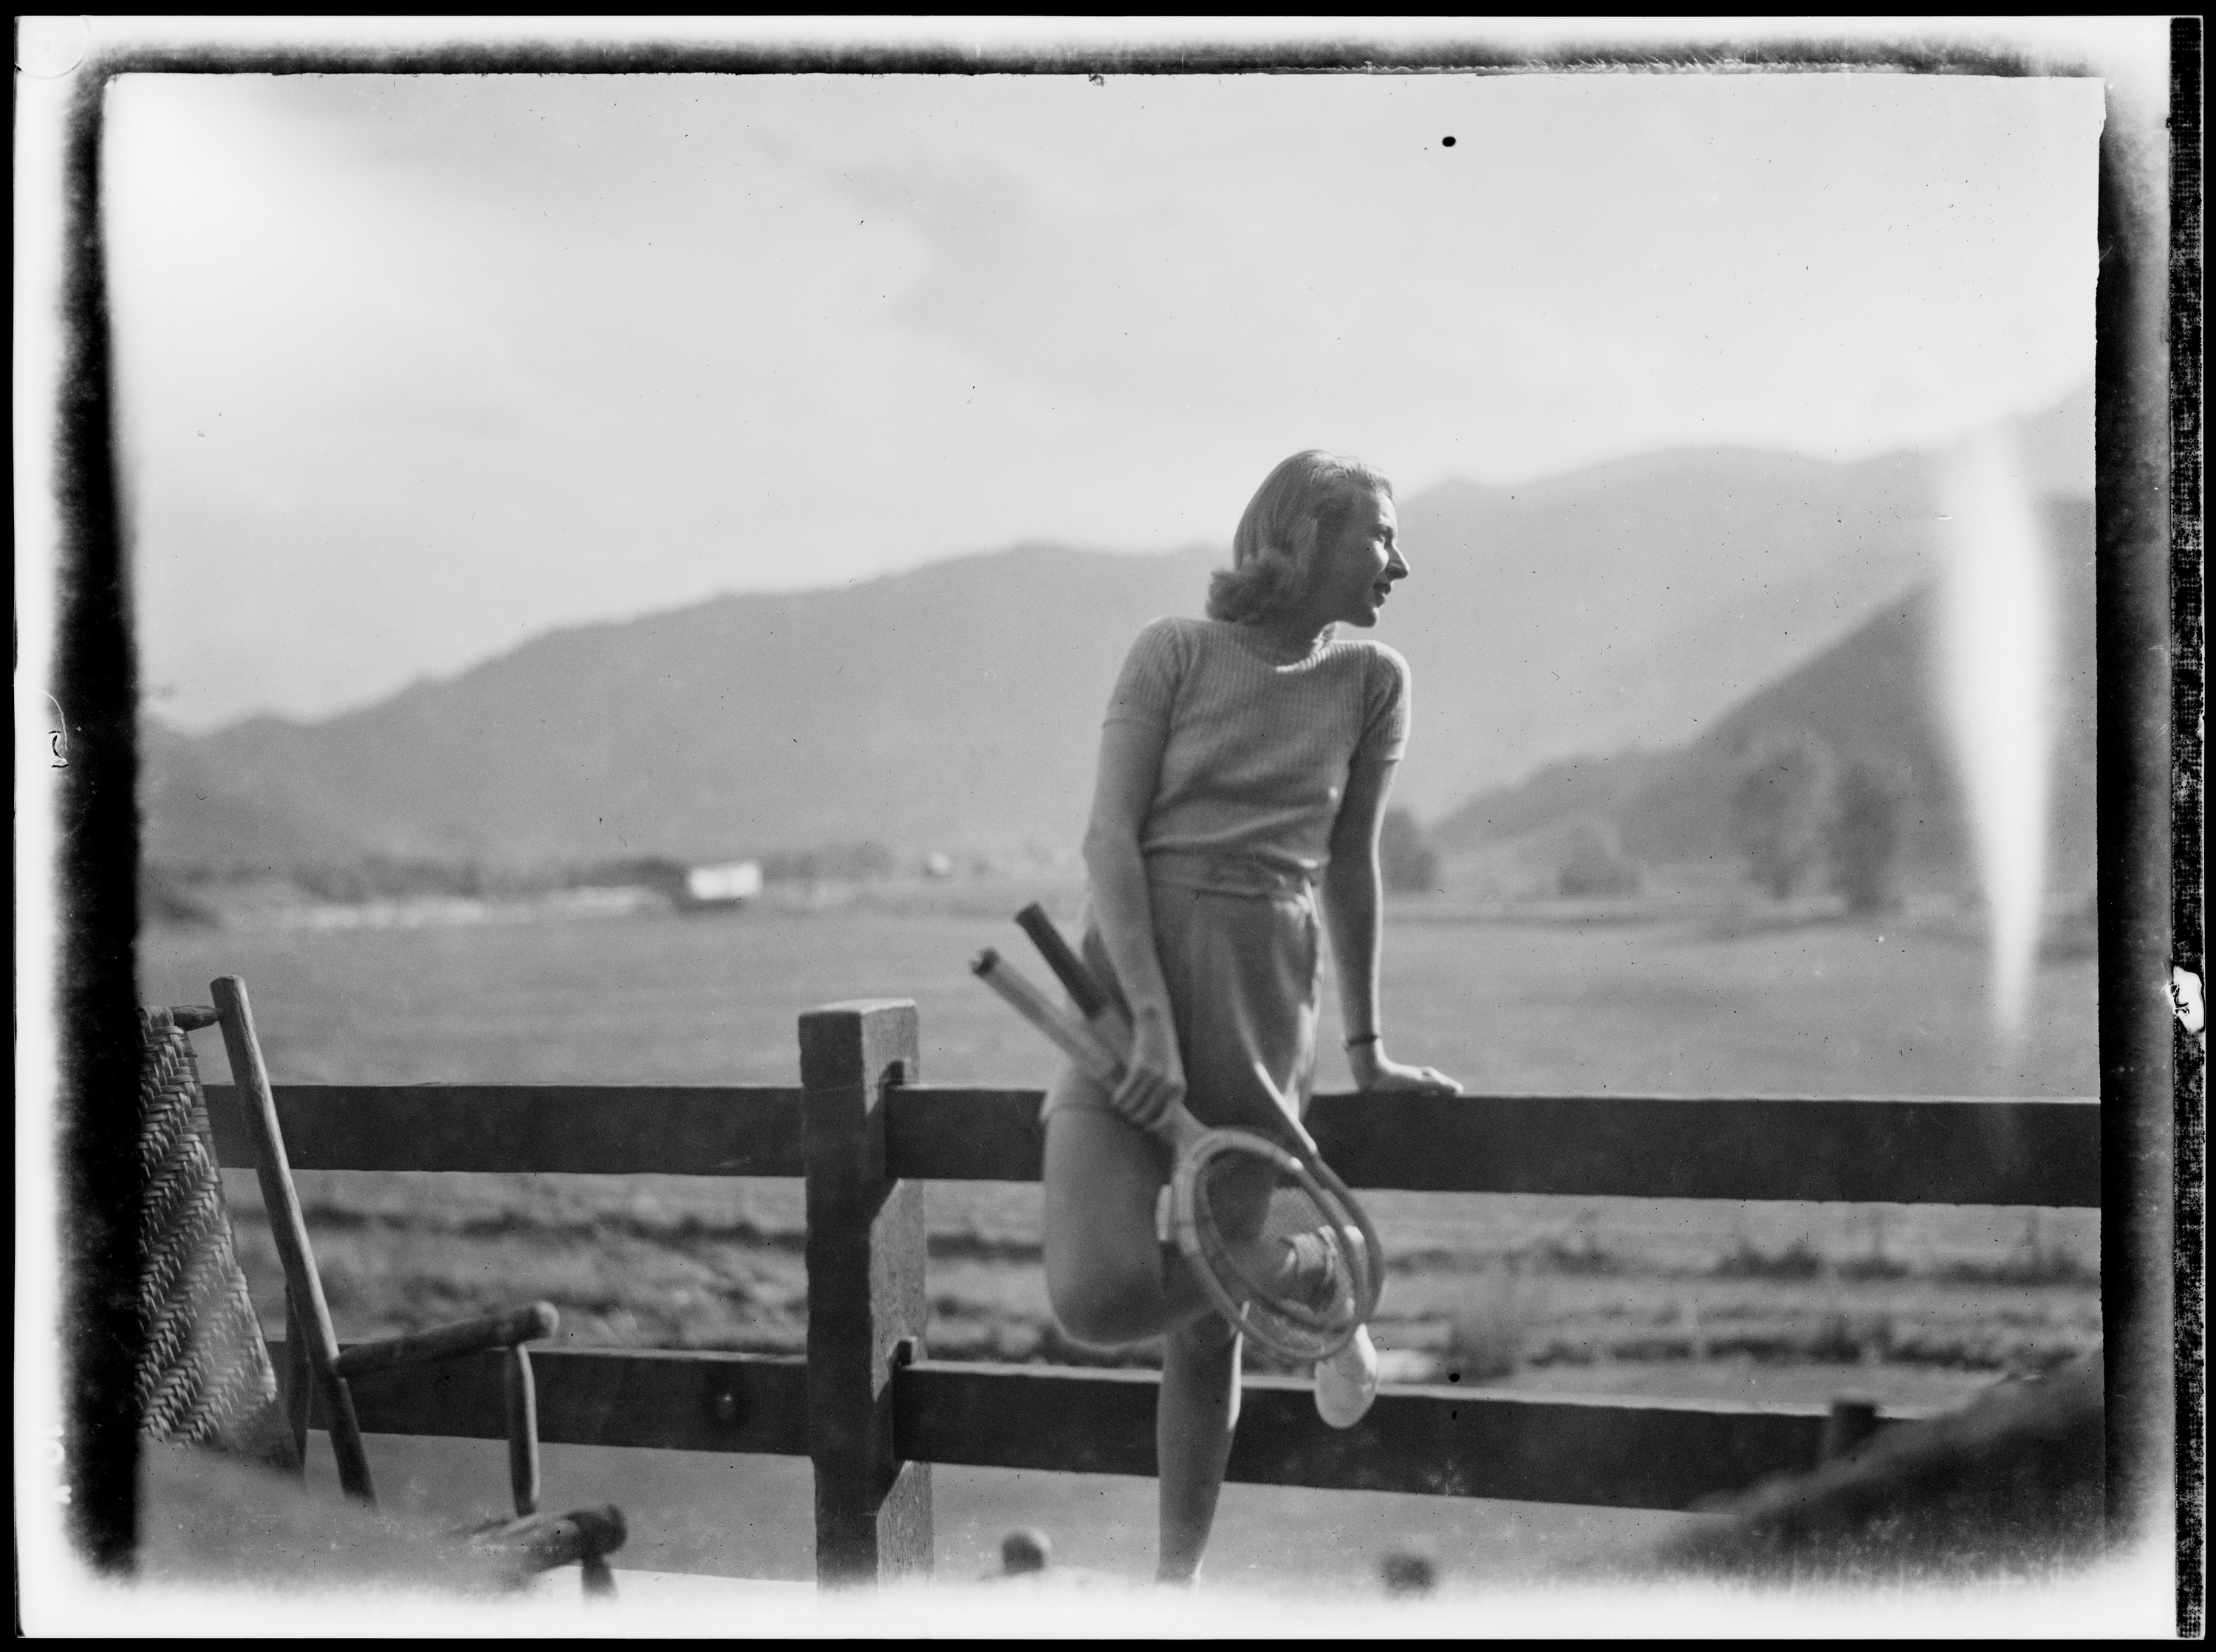 A black and white image of Martha Gellhorn leading against a fence in Sun Valley Idaho.  She holds two tennis rackets and looks away to the right, her face catching the sun.  Behind her is a flat field and, farther away, mountains.